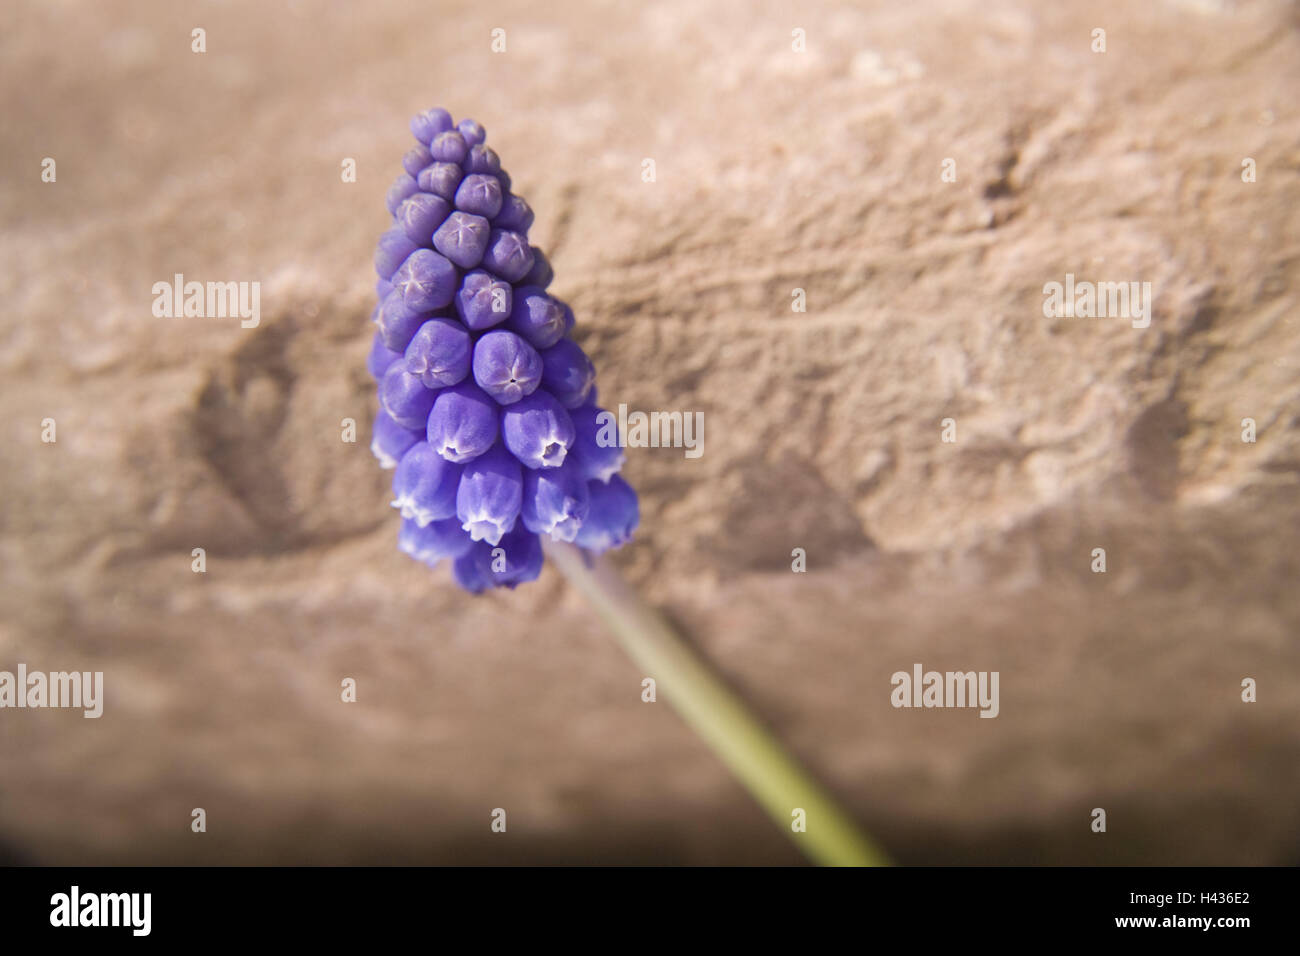 Grape hyacinth, Muscari armeniacum, blossom, detail, wing, flowers, botany, field flowers, spring, spring flowers, medium close-up, nature, plant, meadow flowers, Softly, delicacy, grape hyacinths, muscan, hyacinth plants, Hyacinthaceae, blue, Violet, lilac, stone, bile, blur, Stock Photo